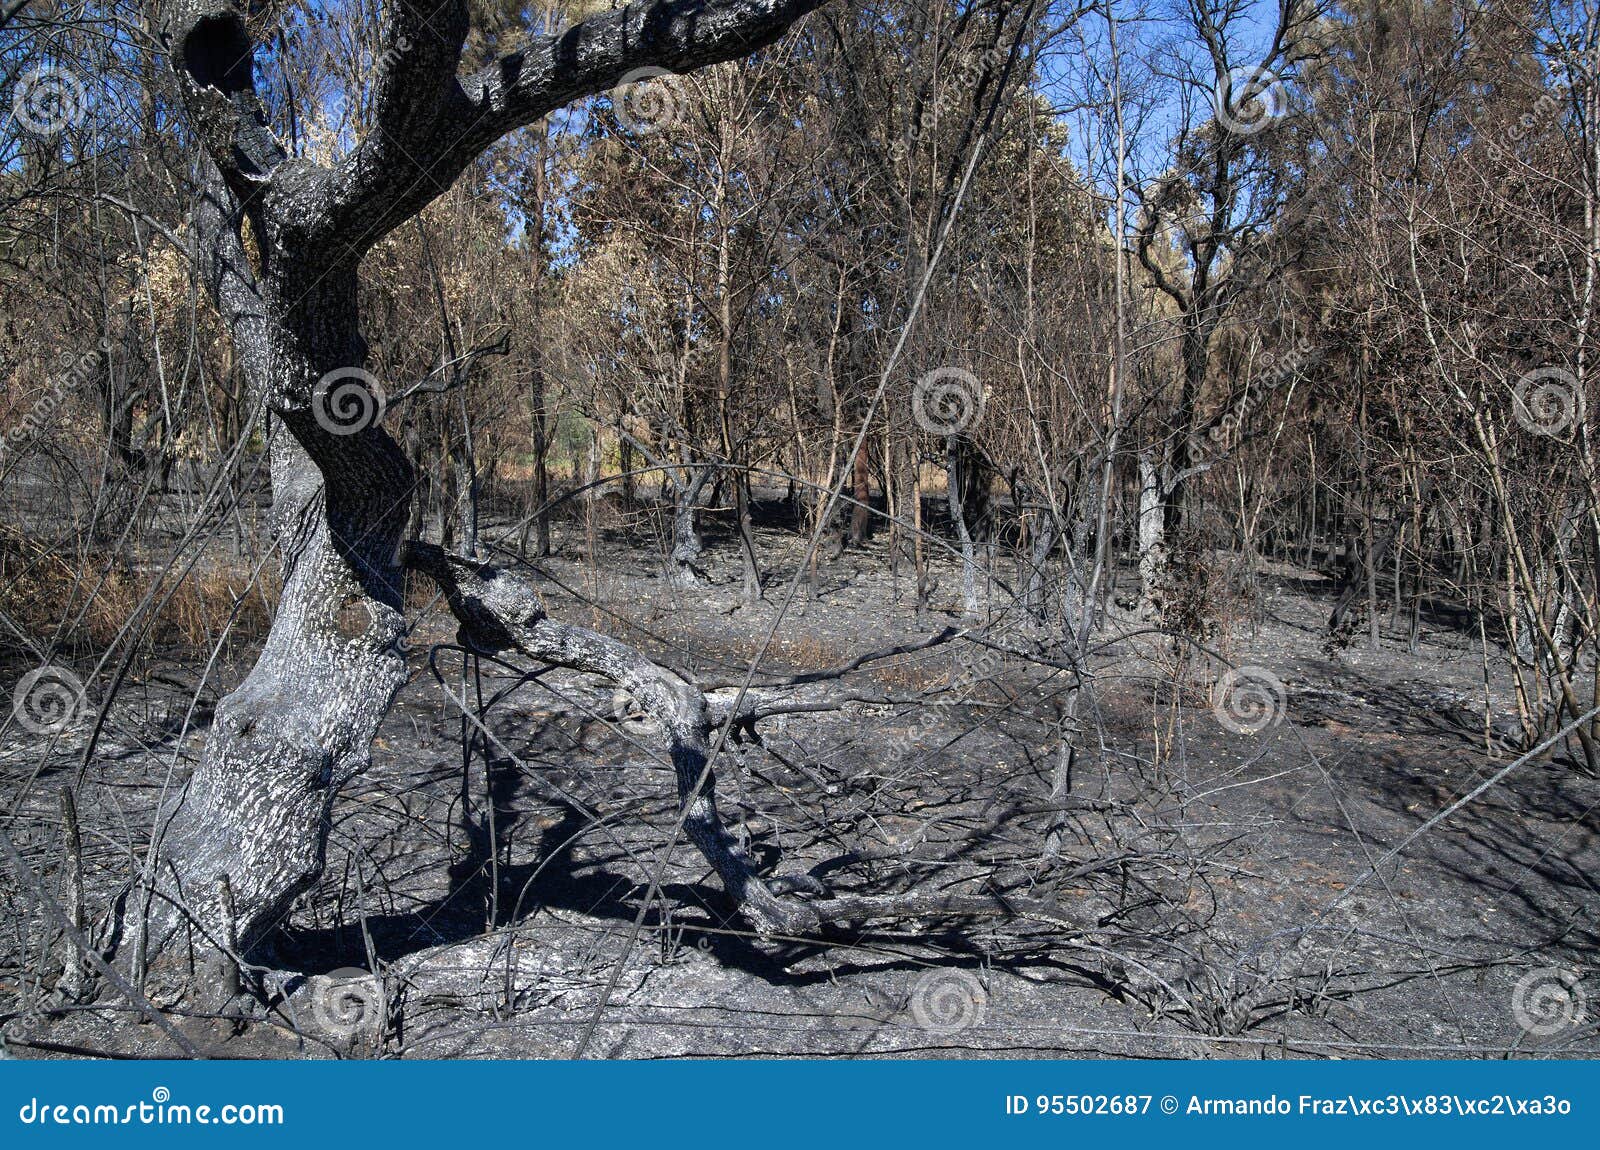 olive tree burnt and broken by forest fire - pedrogao grande